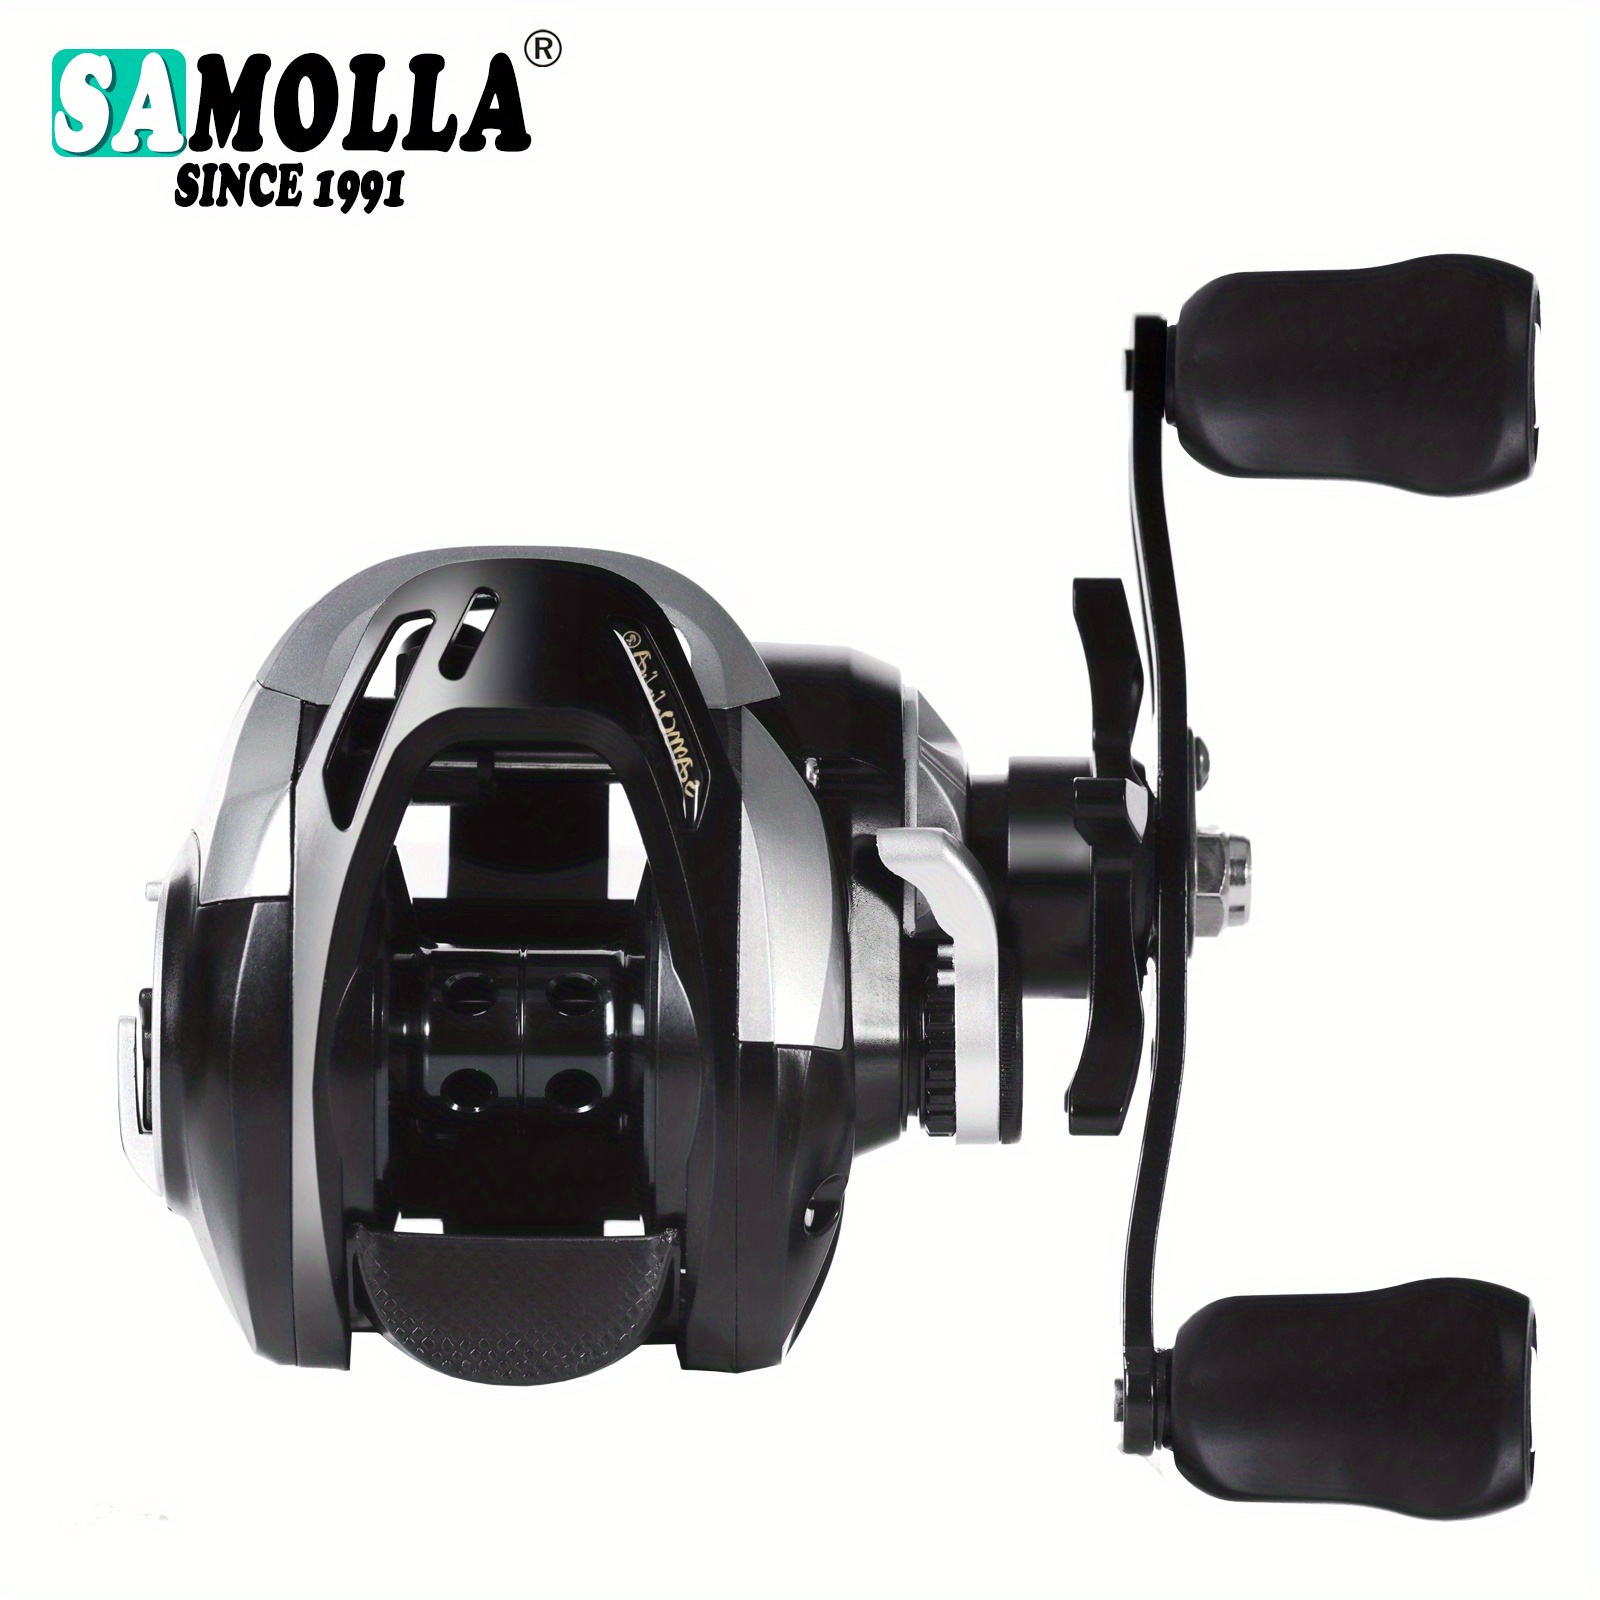 SAMOLLA Fishing Reel Baitcasting Magnetic And Centrifugal Brakes Click  Sound Pressure 7.2:1 10kg Waterproof Saltwater Cast